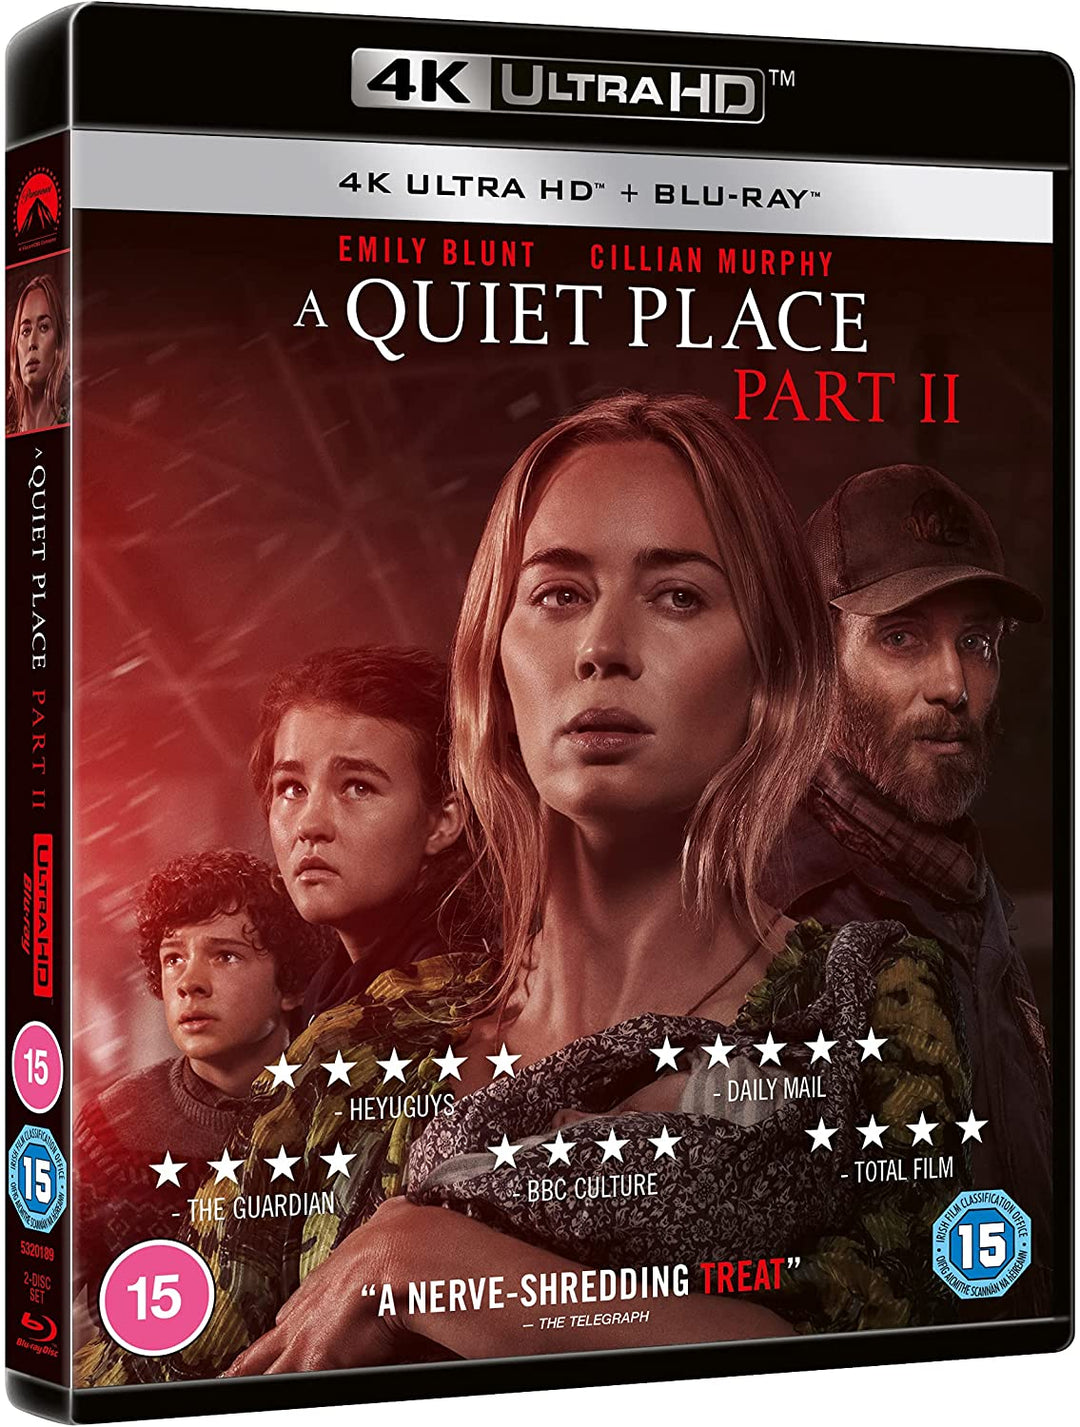 A Quiet Place Teil II 4K UHD – Horror/Science-Fiction [Blu-ray]